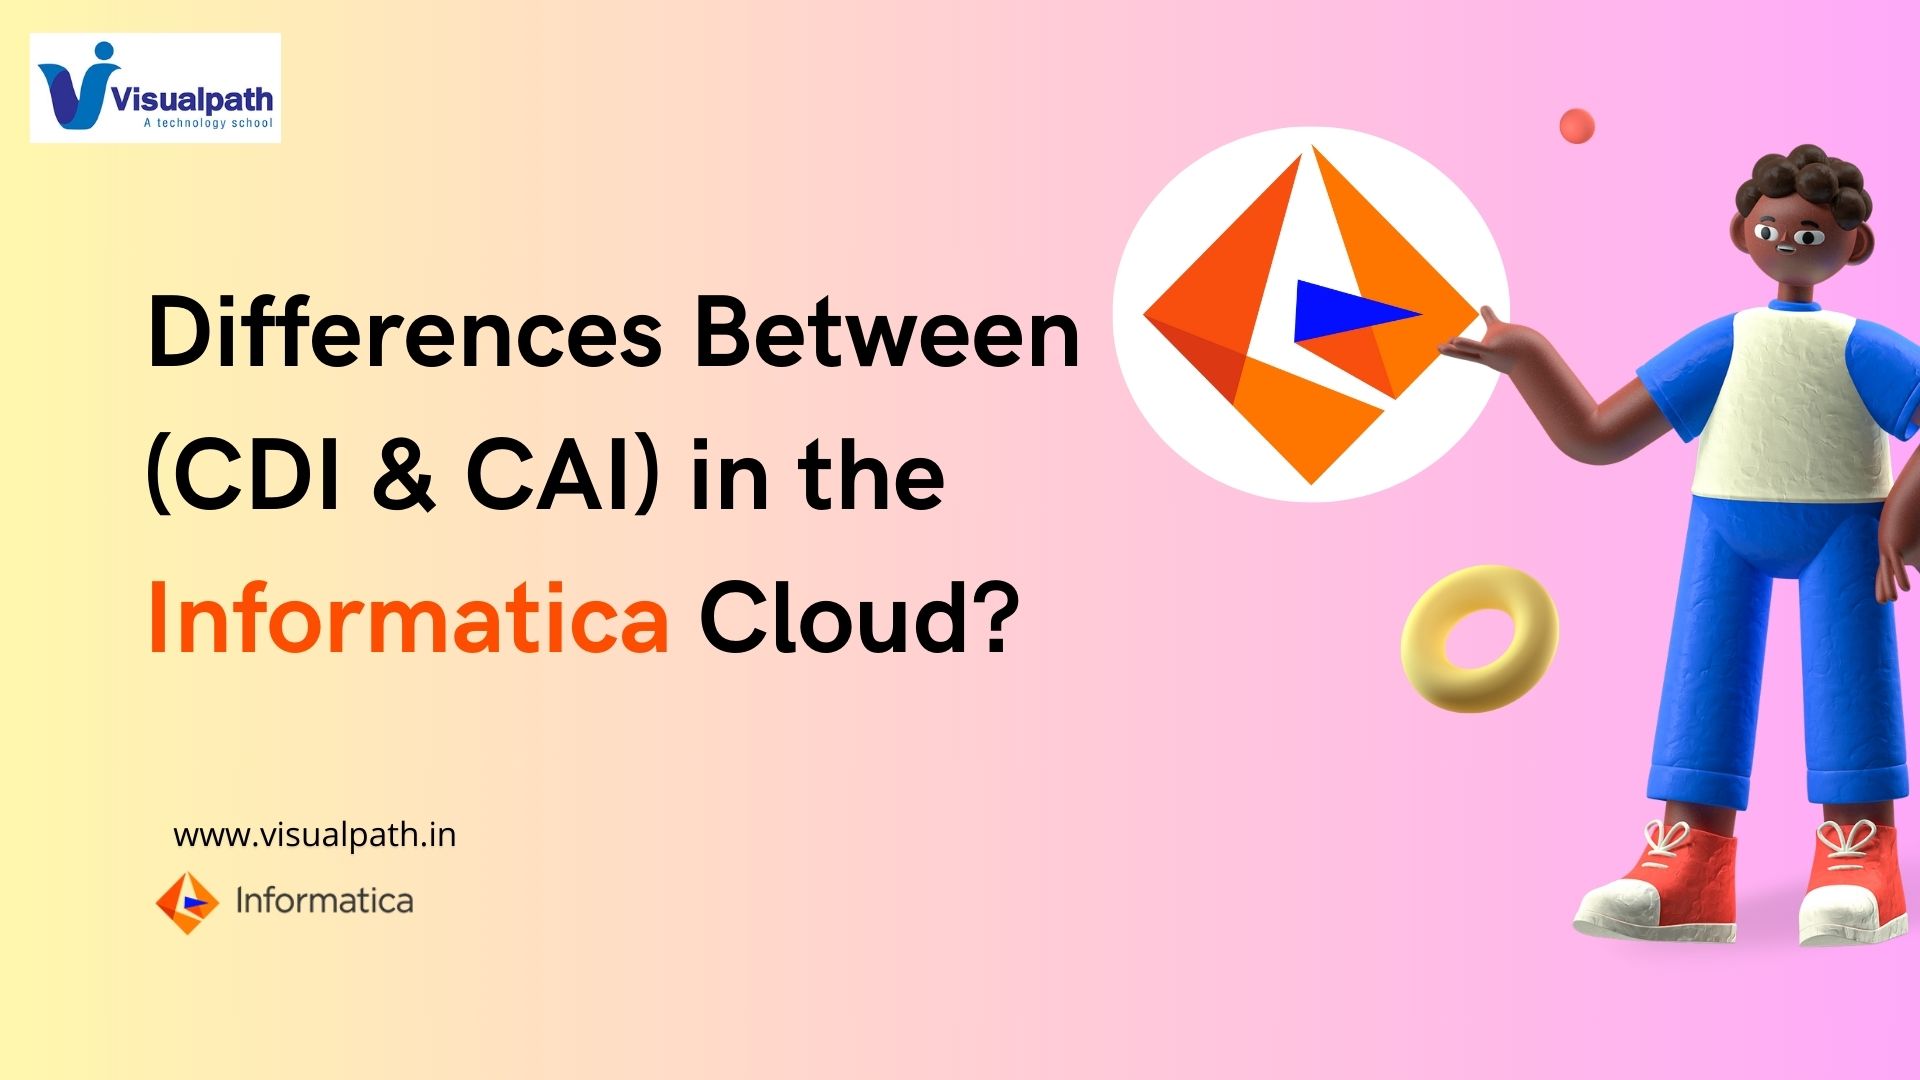 What are the Differences between CDI and CAI in the Informatica Cloud?